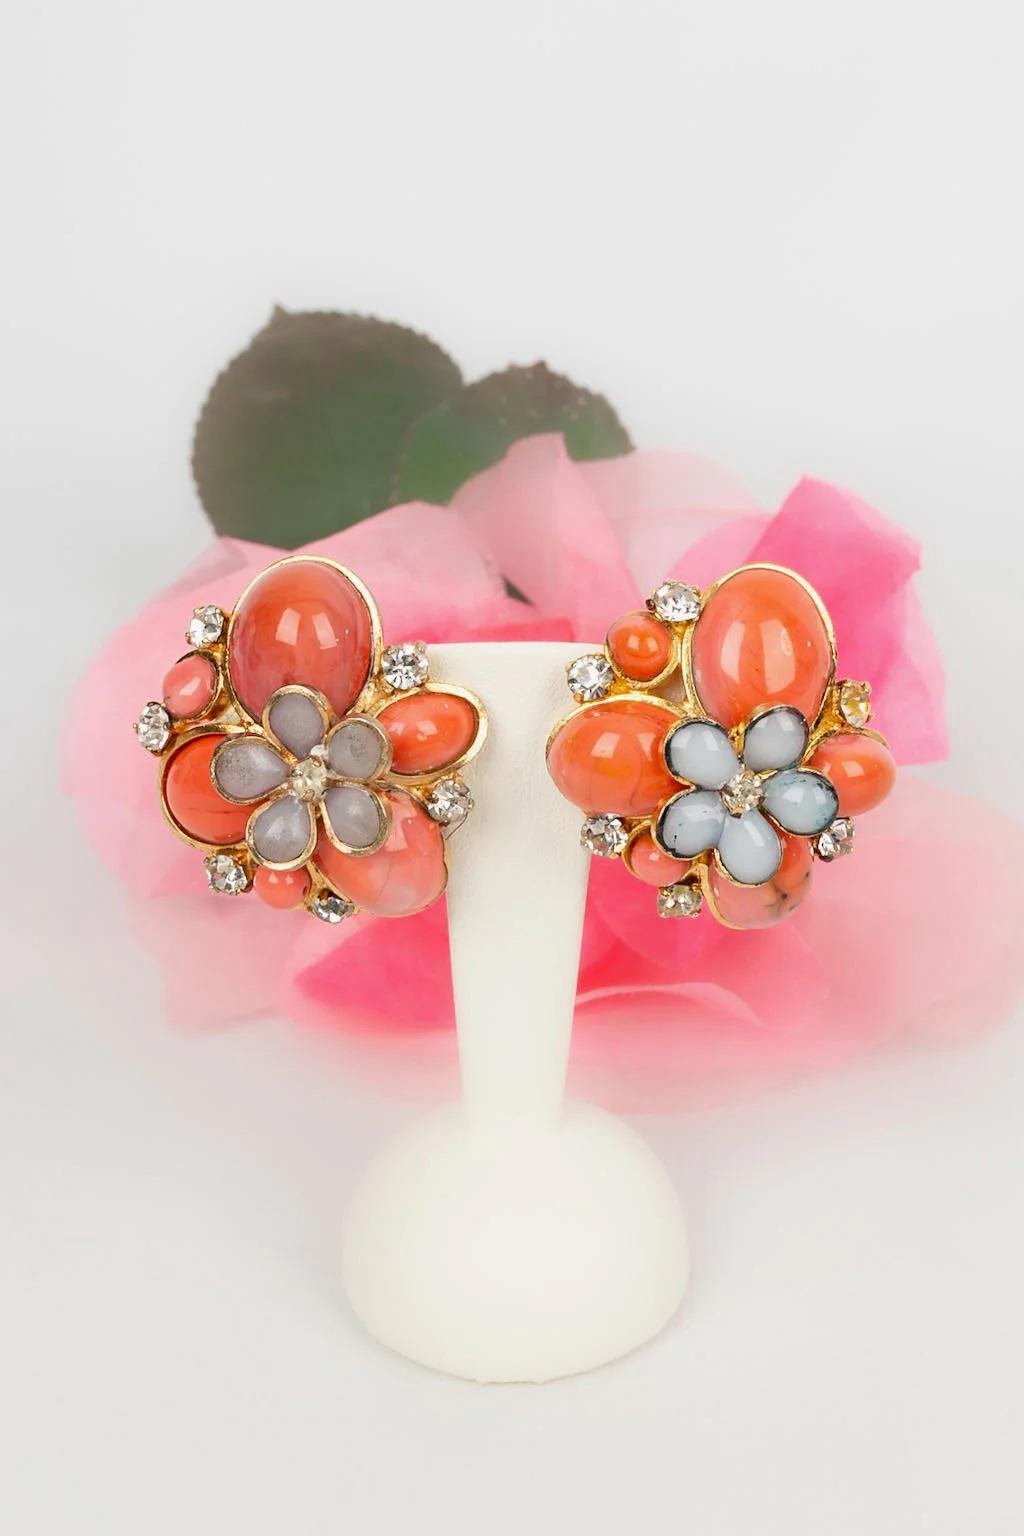 Old Gripoix Flower Earrings in Gold Metal and Glass Paste For Sale 3